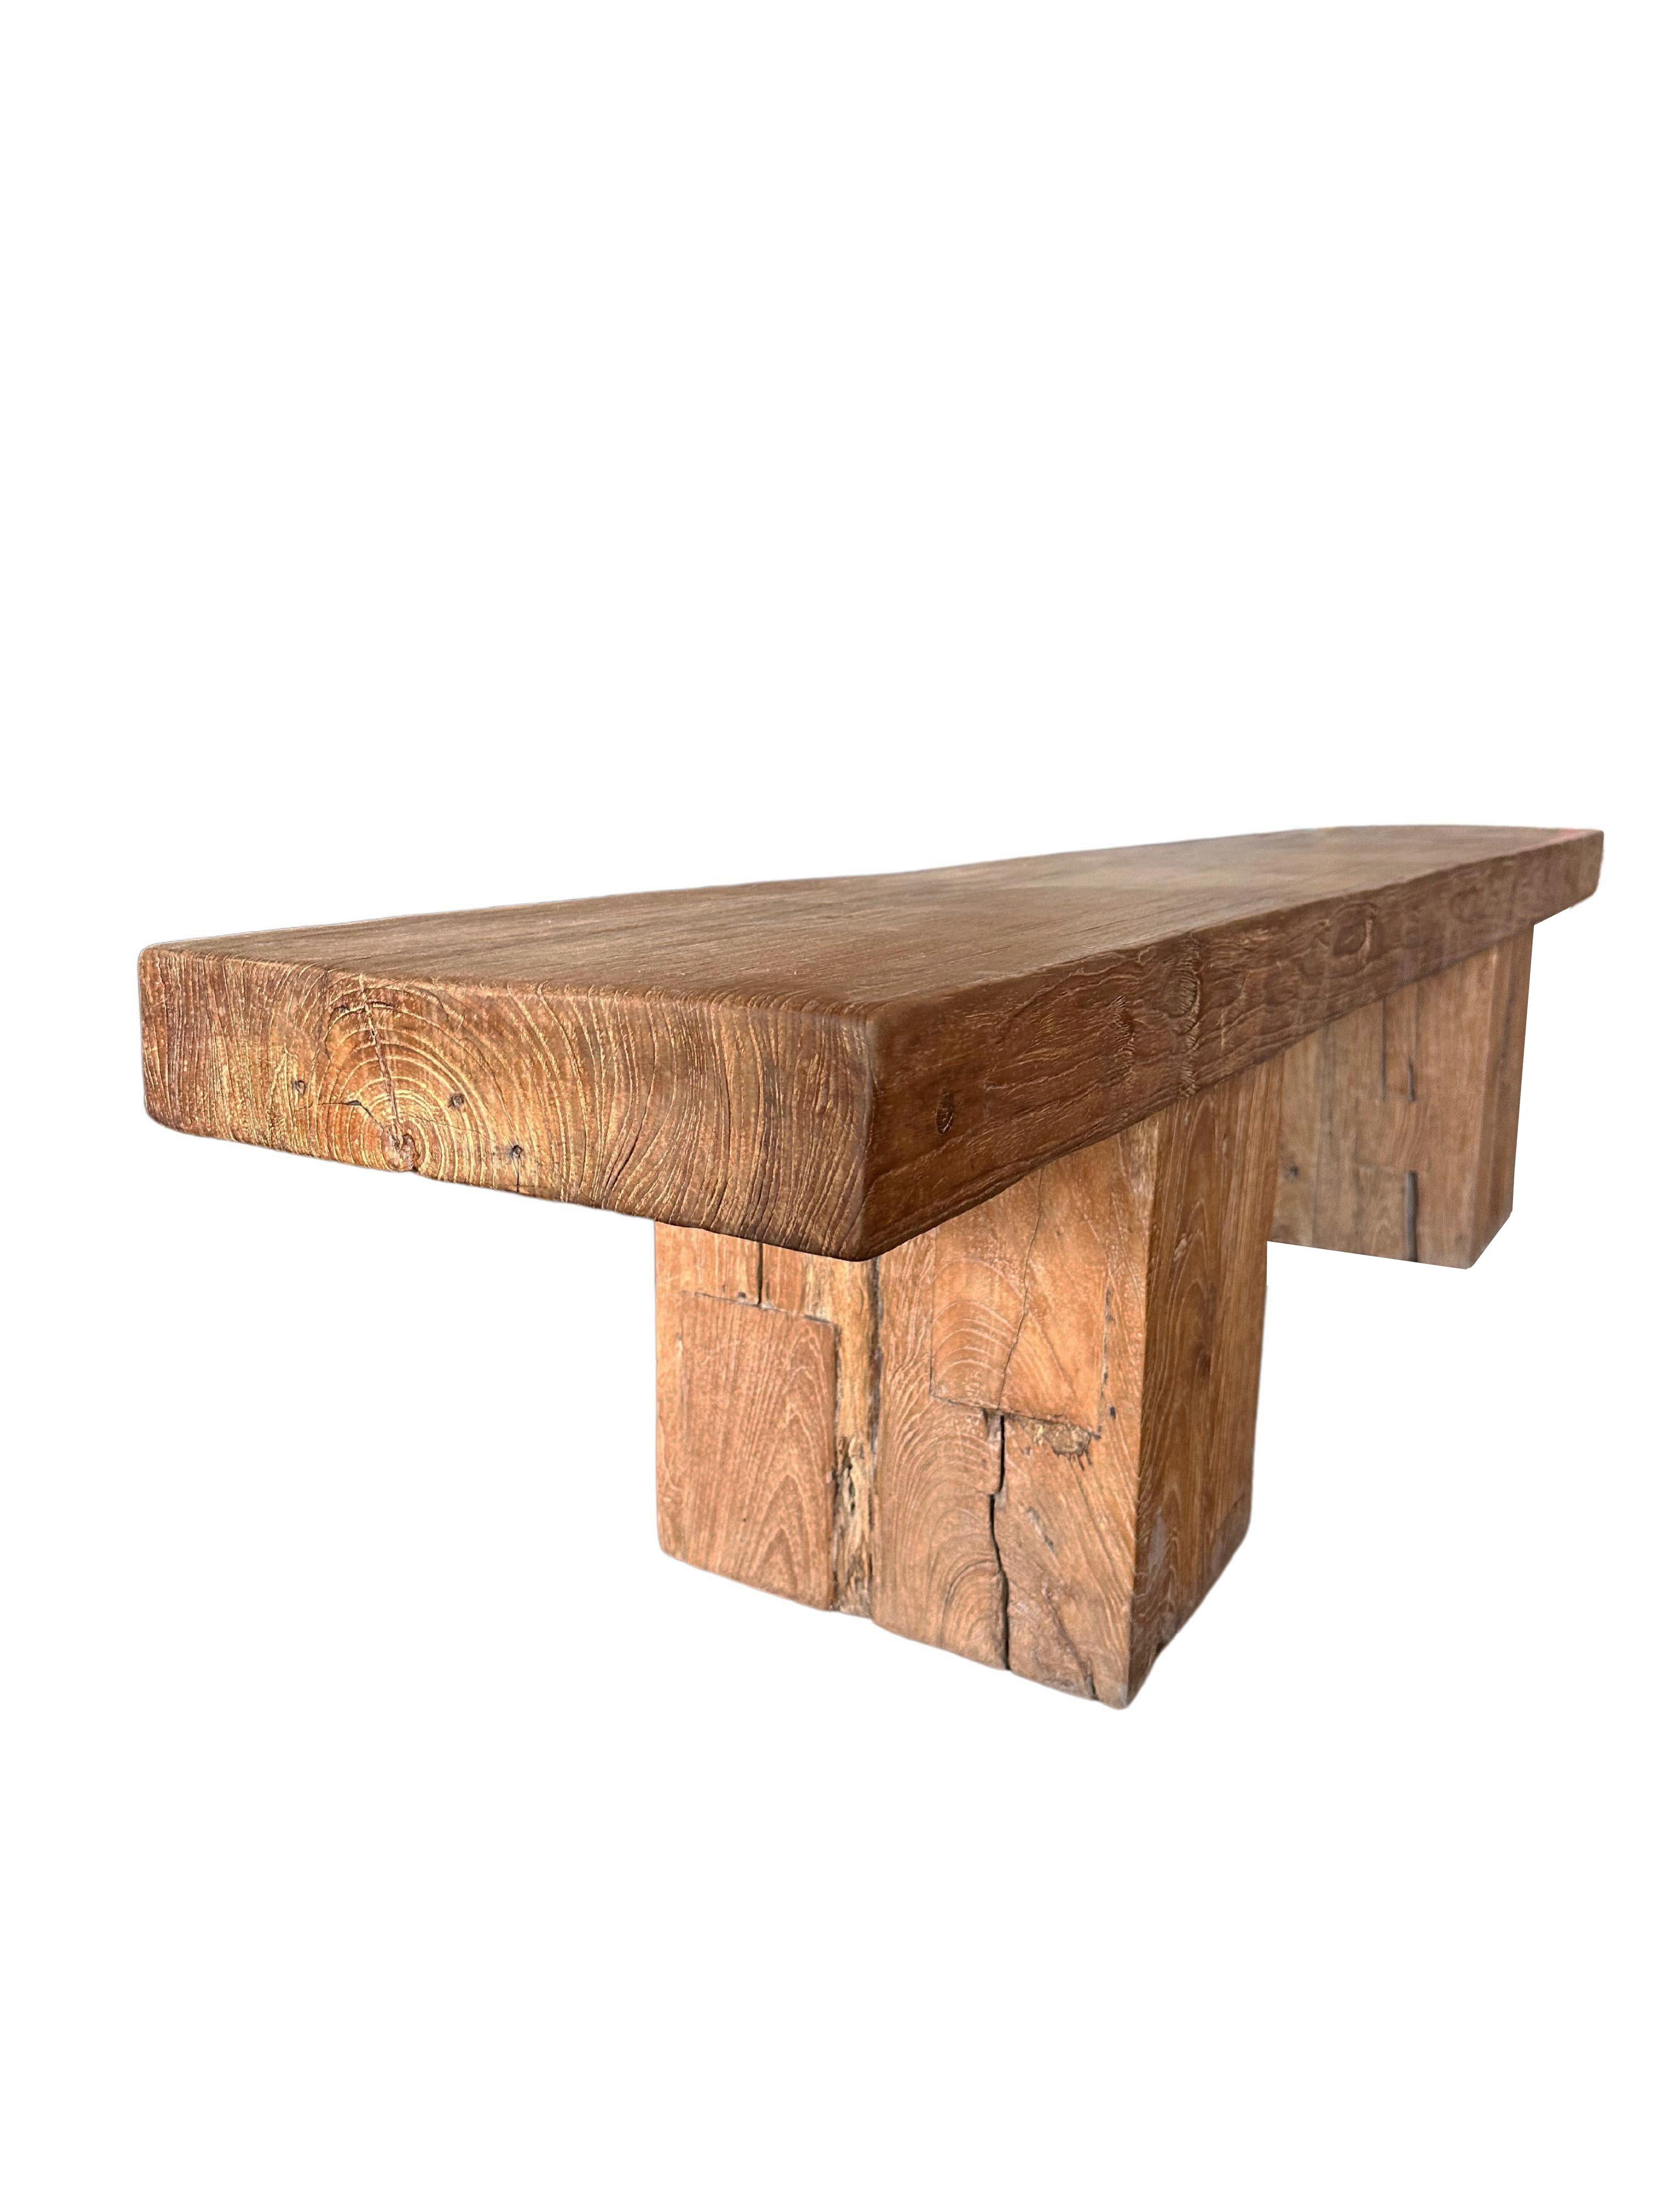 Contemporary Solid Teak Wood Sculptural Bench, Modern Organic For Sale